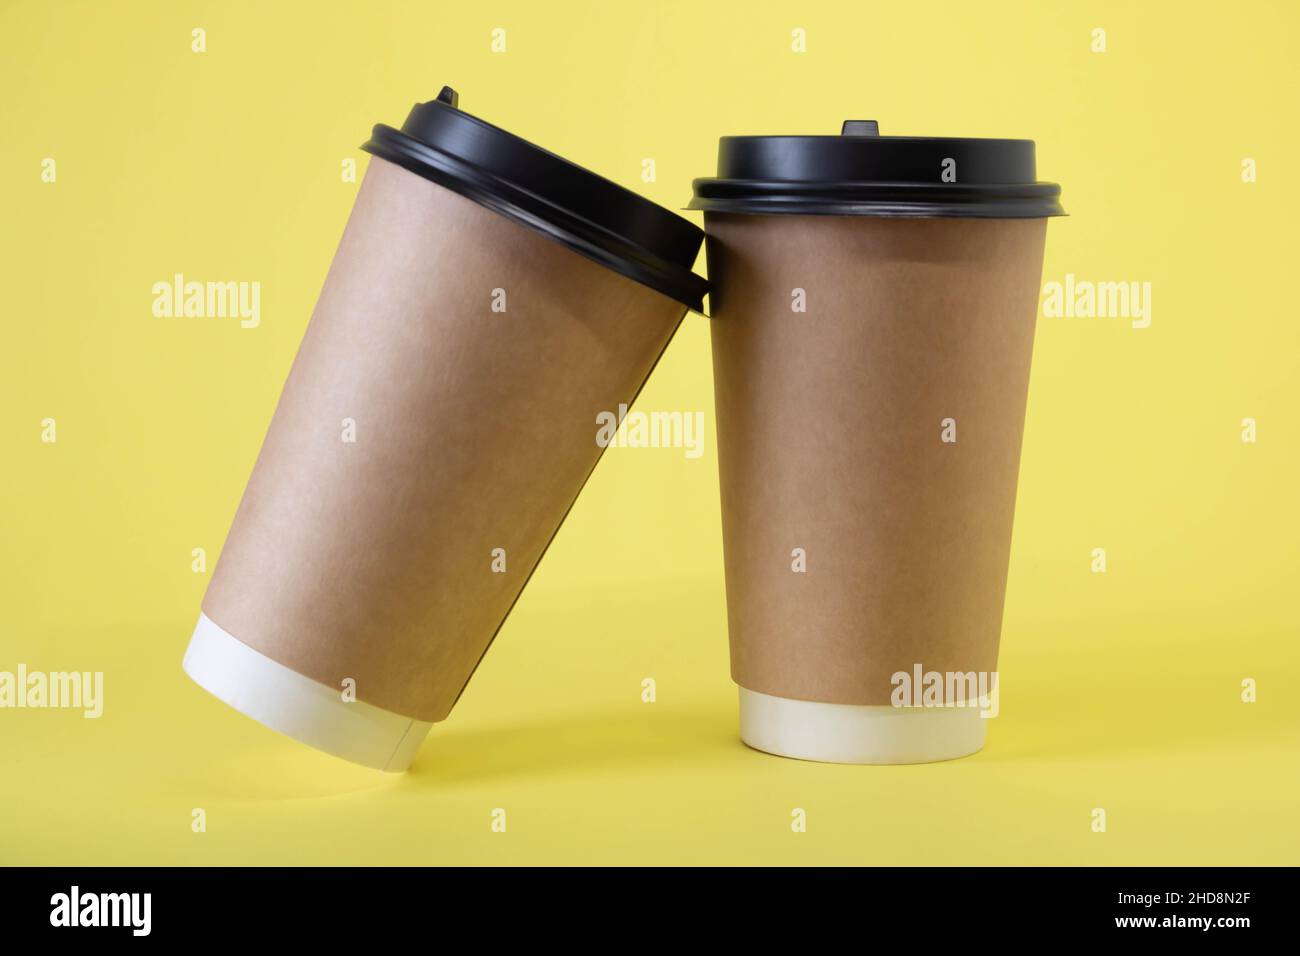 Two brown glasses with lids on a yellow background. Stock Photo